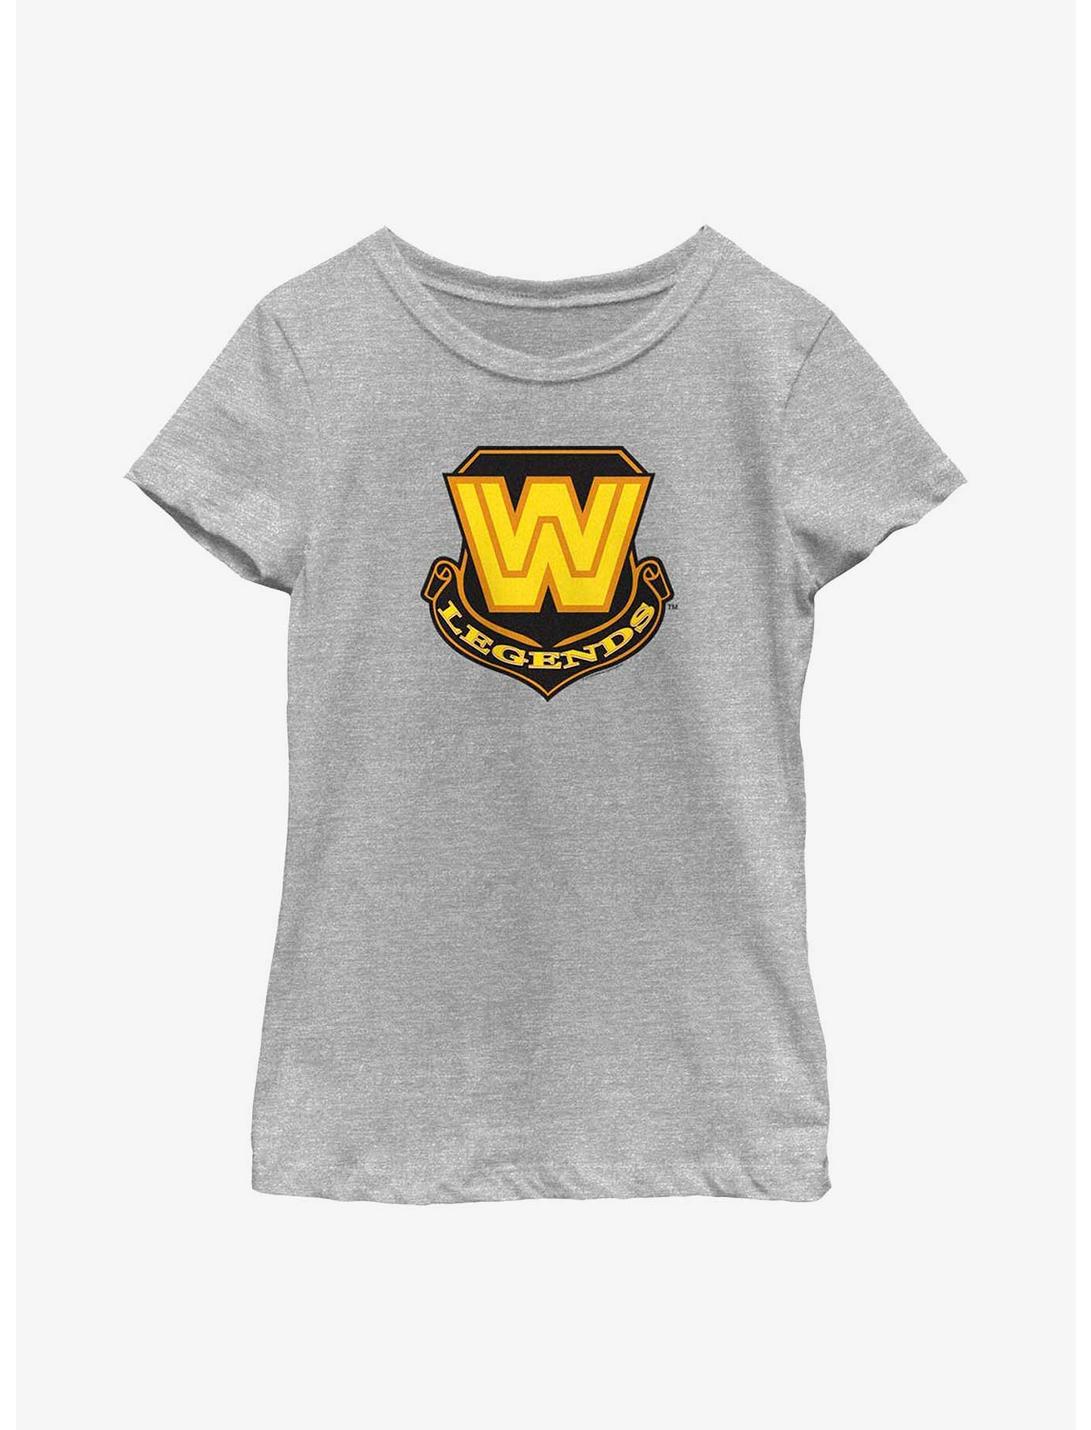 WWE Classic Logo Legends Youth Girls T-Shirt, ATH HTR, hi-res